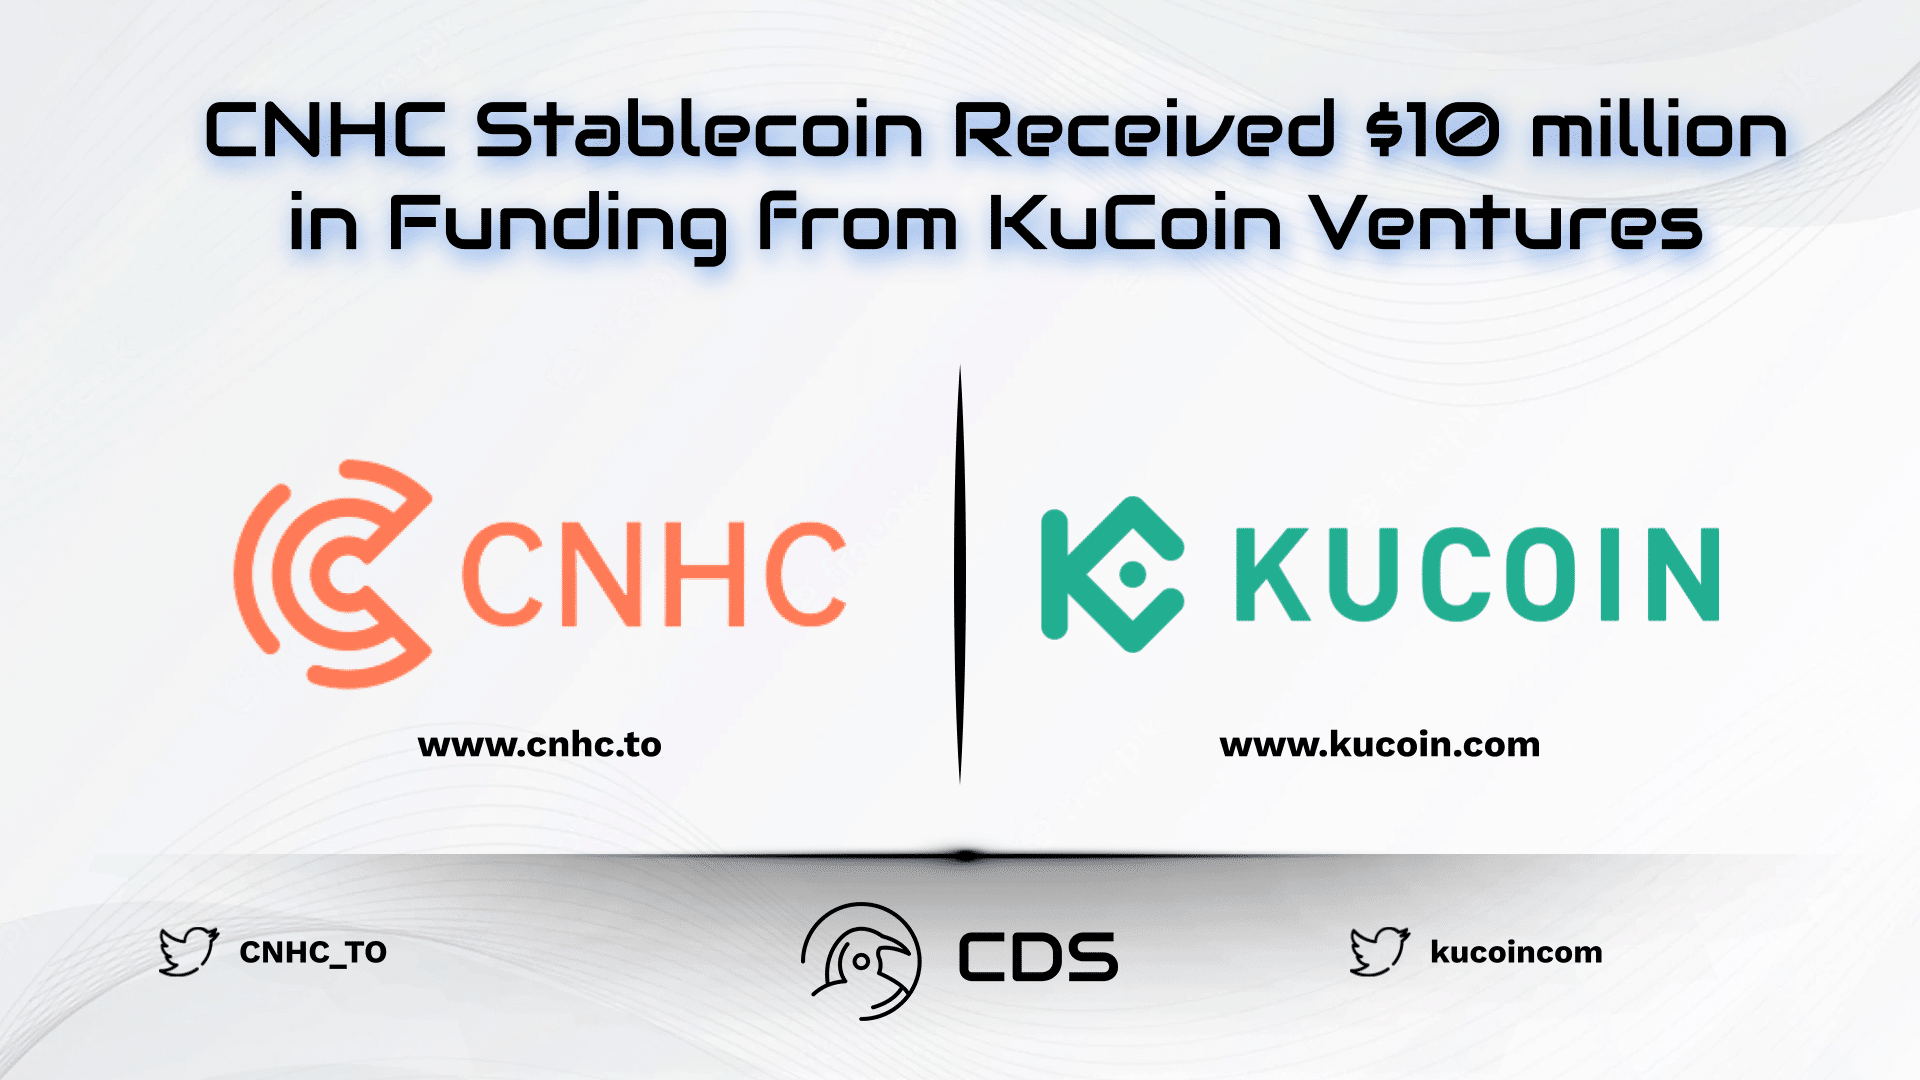 CNHC Stablecoin Received $10 million in Funding from KuCoin Ventures